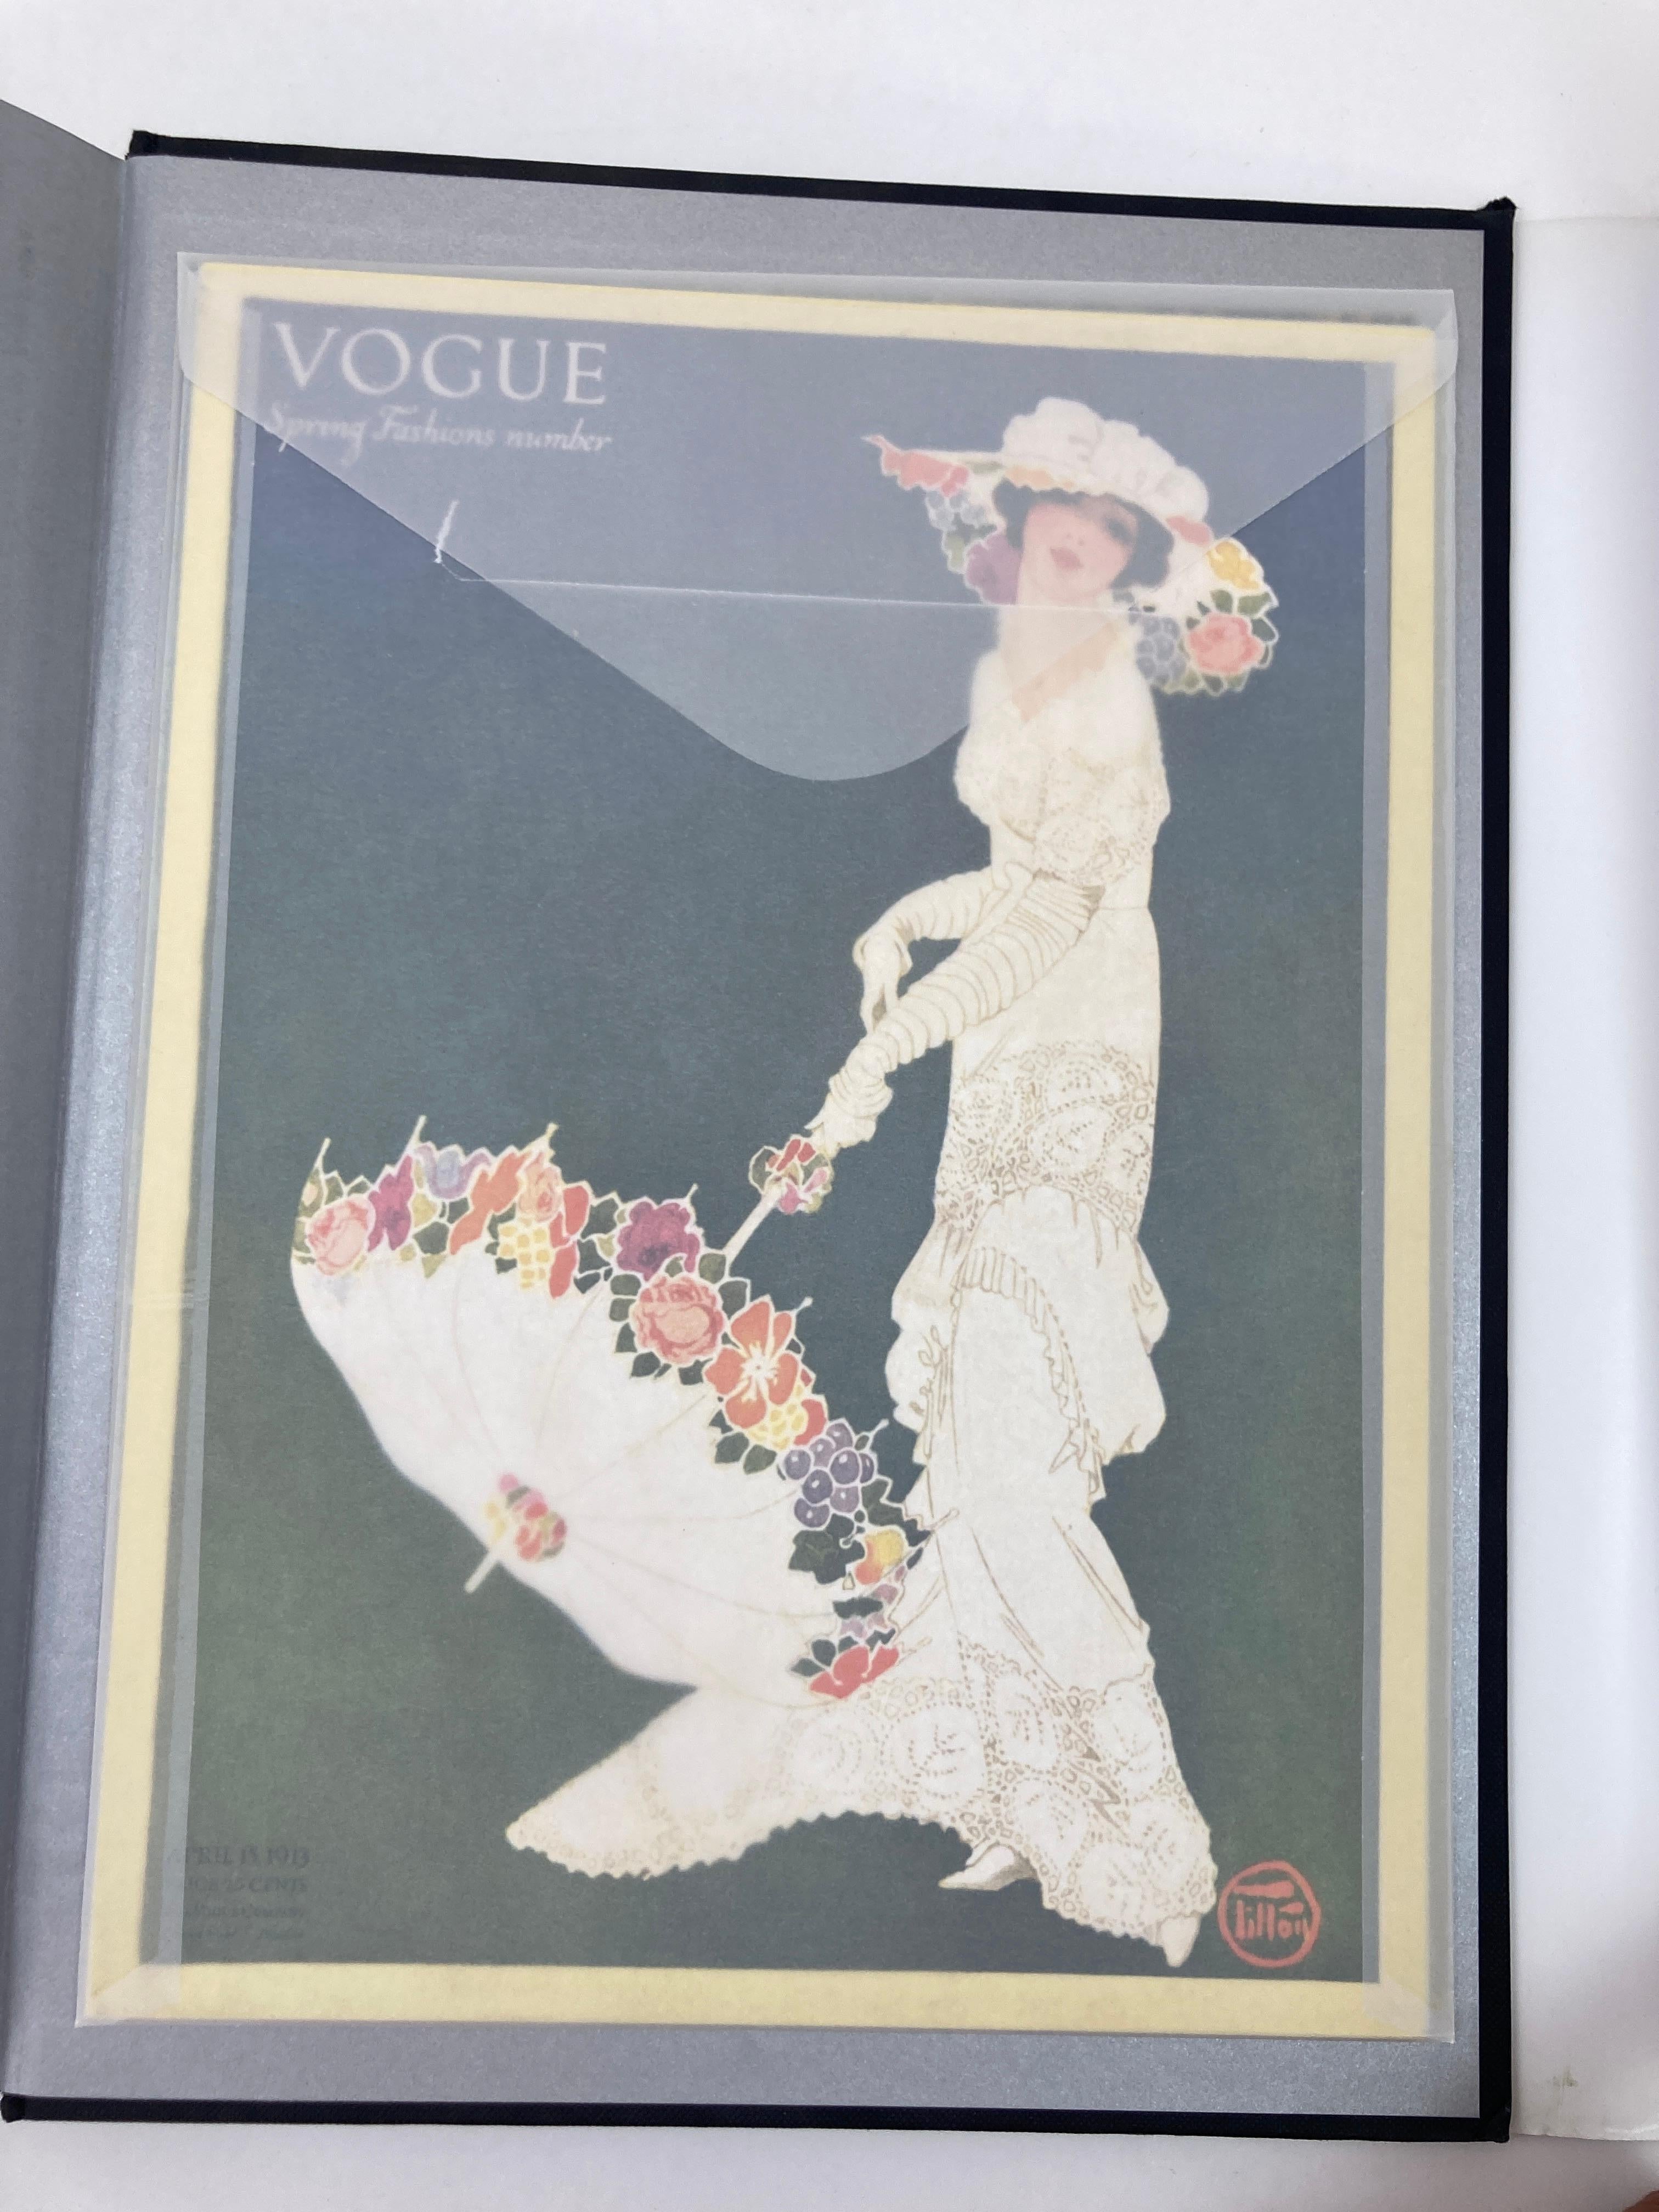 Vogue The Covers Hardcover Coffee Table Book For Sale 15